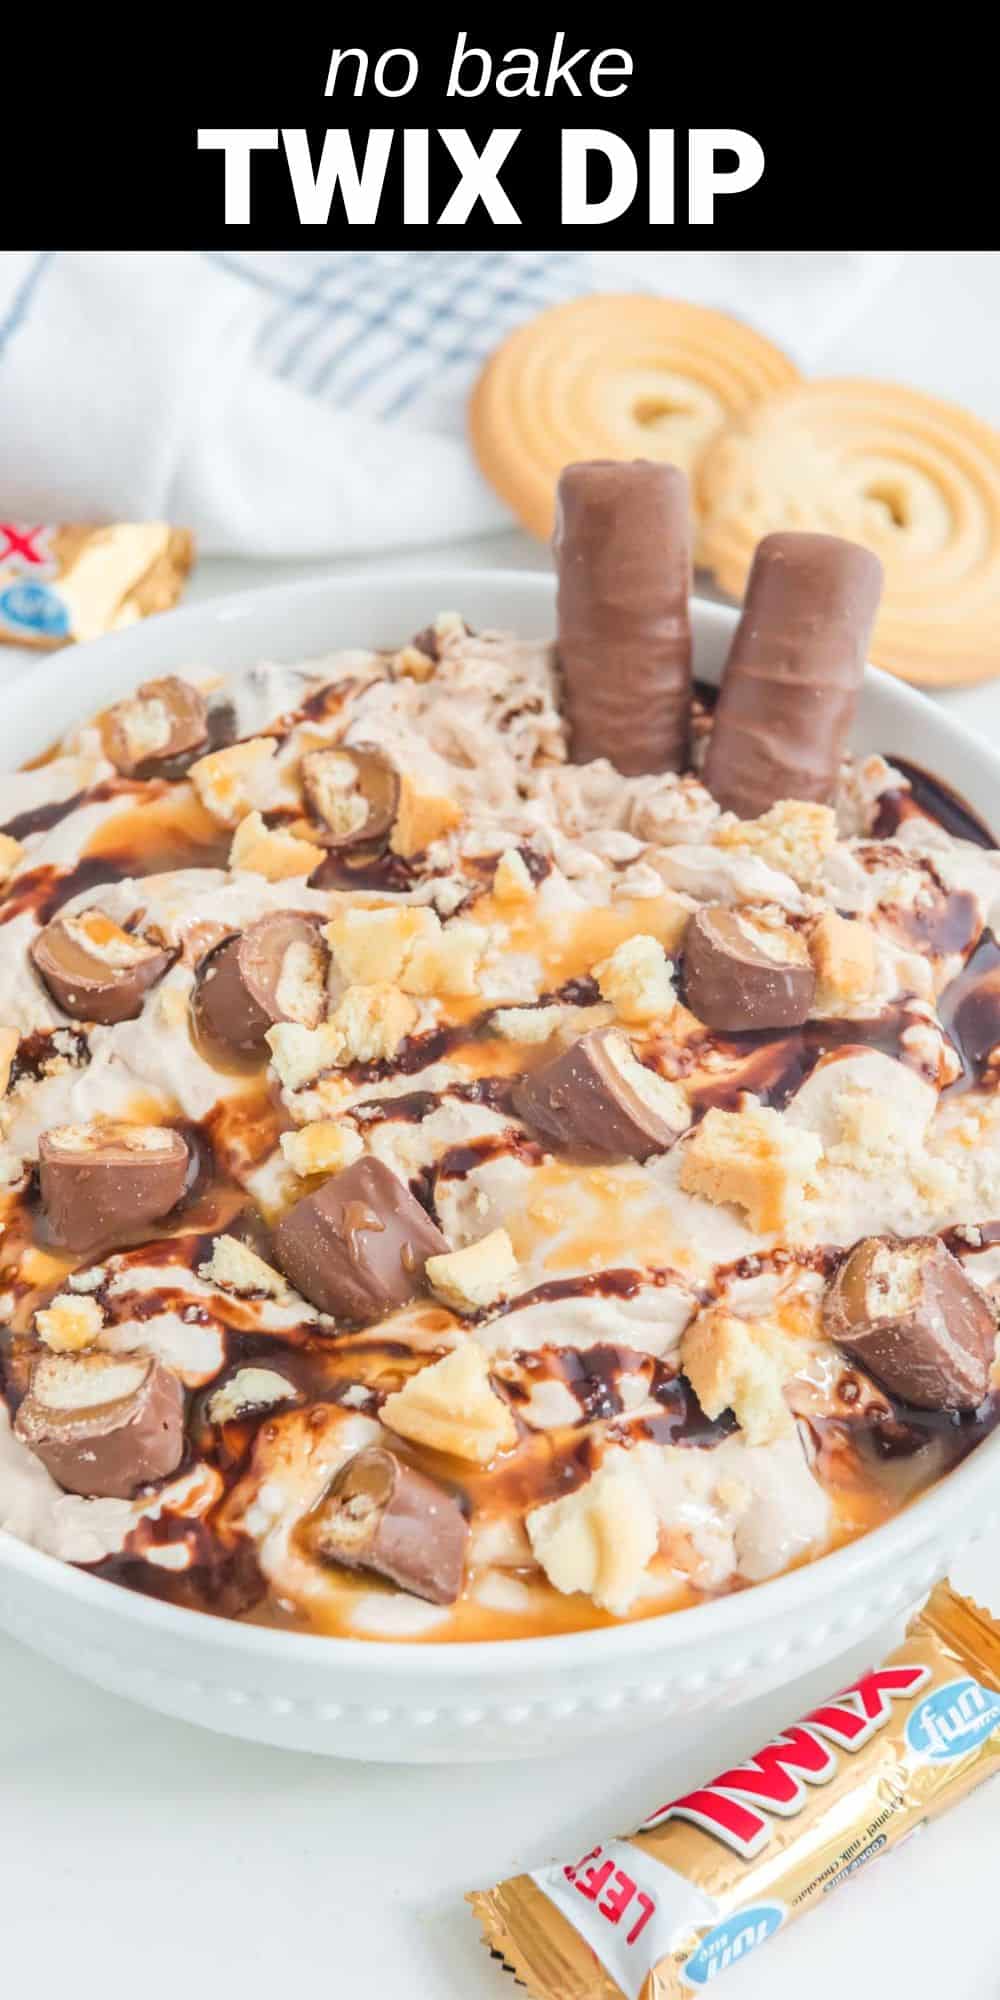 This Twix Dessert Dip is a sweet and decadent cream cheese dip swirled with rich caramel and chocolate sauces. Shortbread crumbles are added to give it the signature Twix shortbread crunch. It’s dipping perfection!